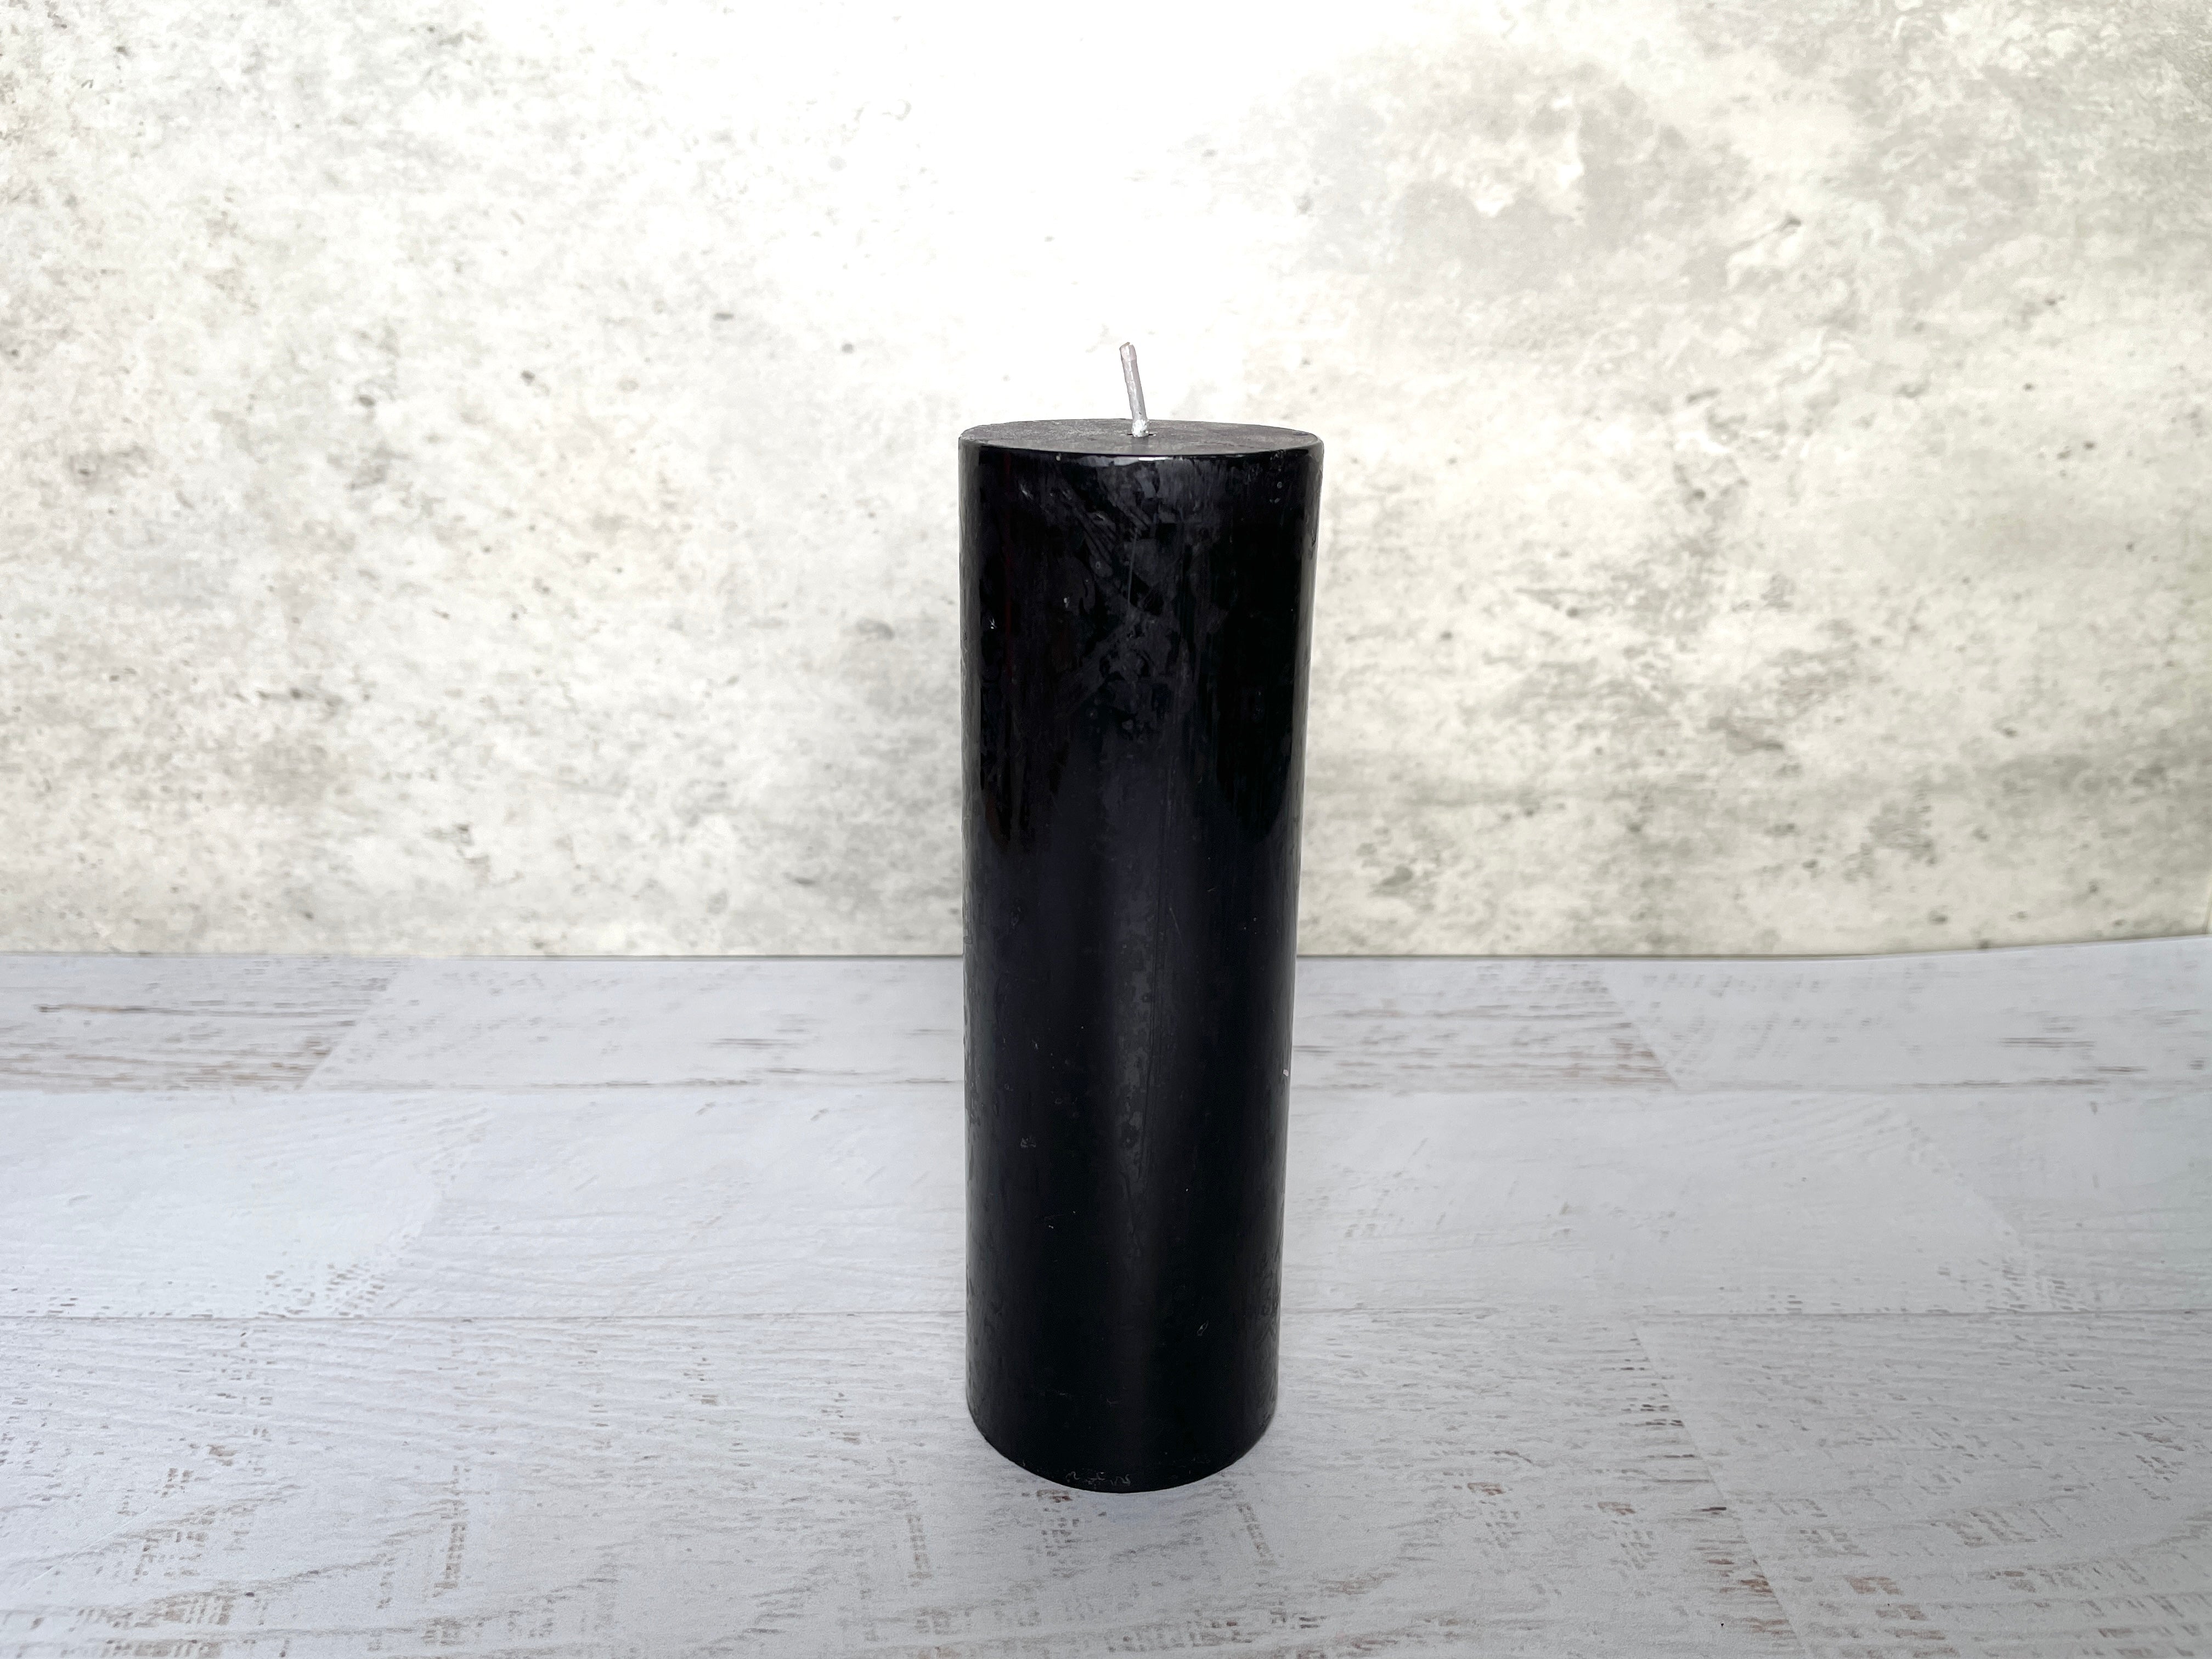 Buy Online Latest and Unique Black Pillar Candle 2"x 6" - Protection, Repelling, Protection, Banishing | Shop Best Spiritual Items - The Mystical Ritual